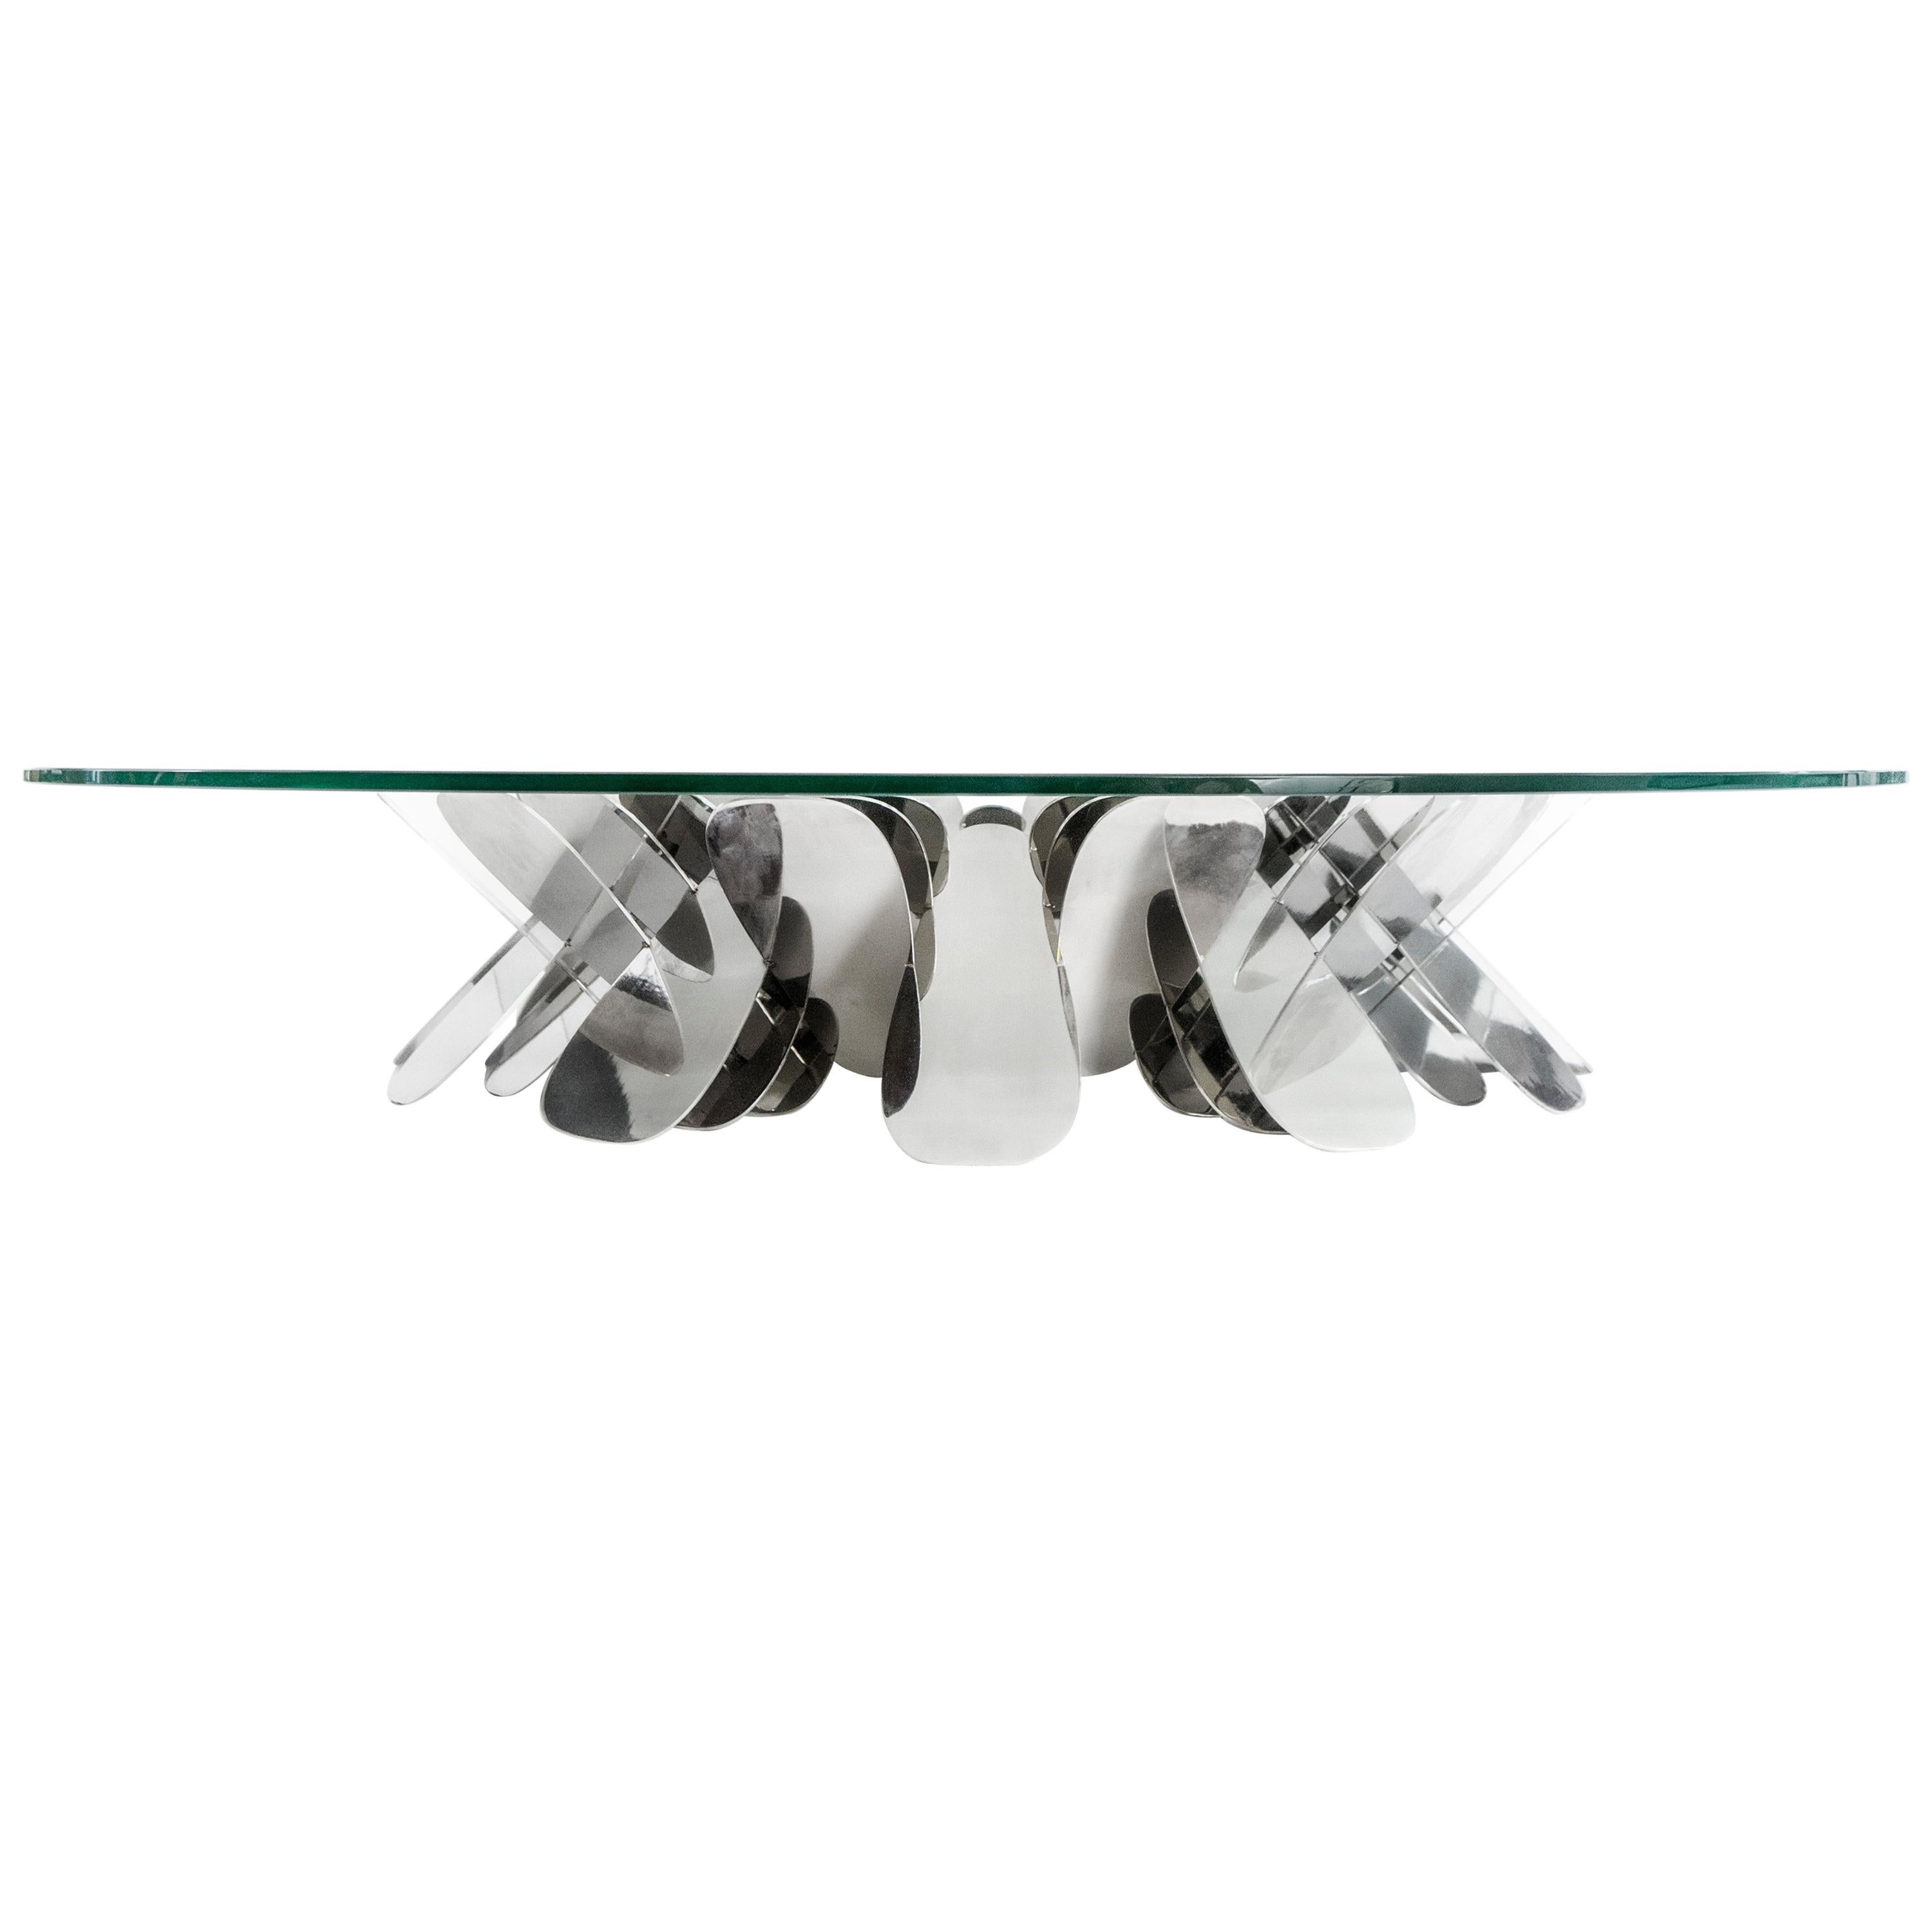 "Narciso" Contemporary Geometric Table in Mexican Polished Stainless Steel  im Angebot